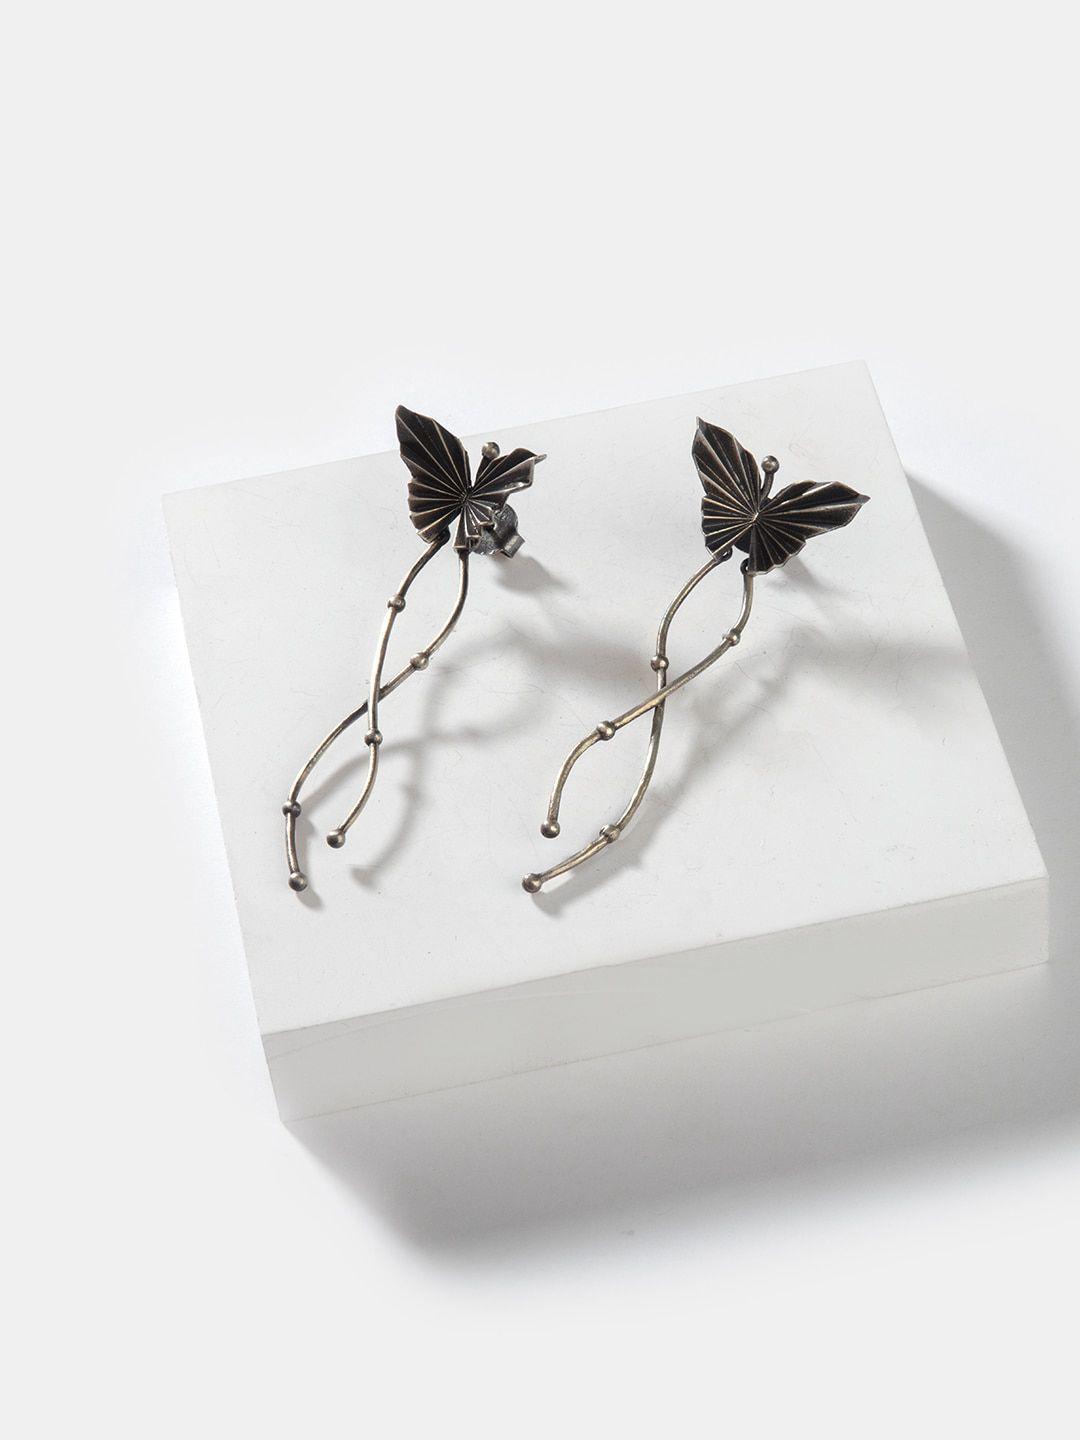 shaya silver-toned chasing my untamed thrills contemporary stud earrings